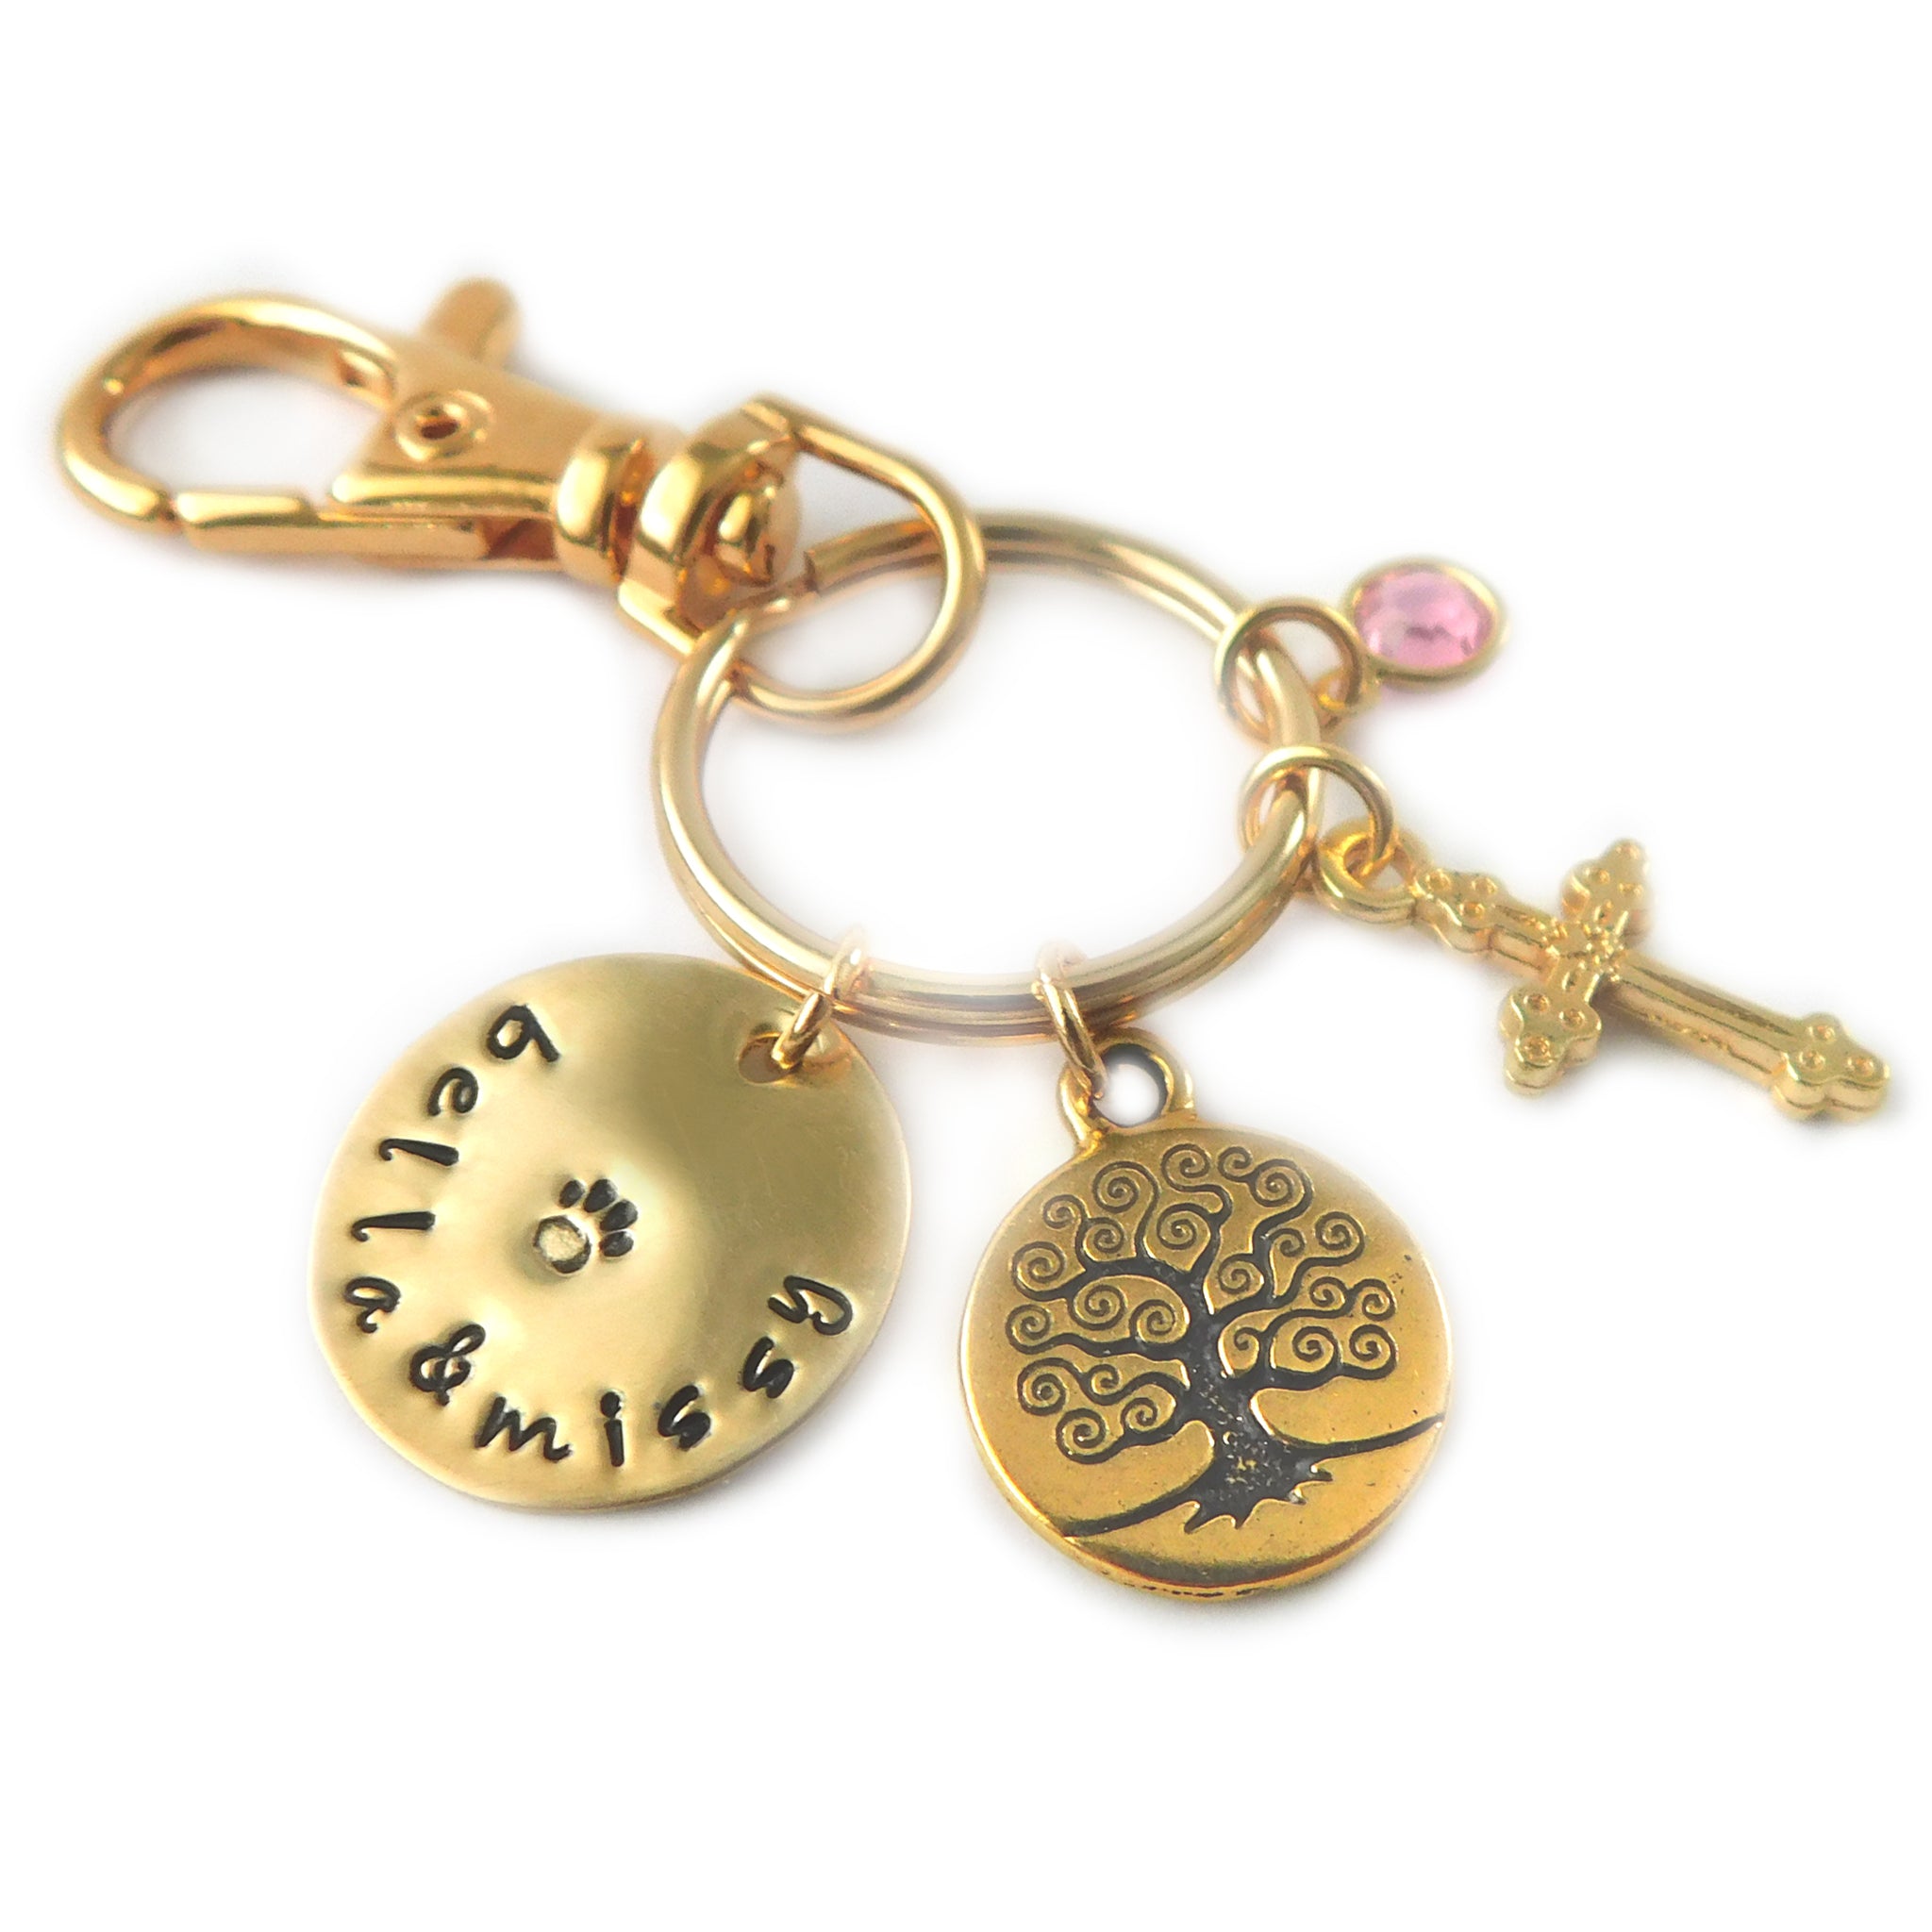 Customize Your Own Keychain – The Sassy Apple